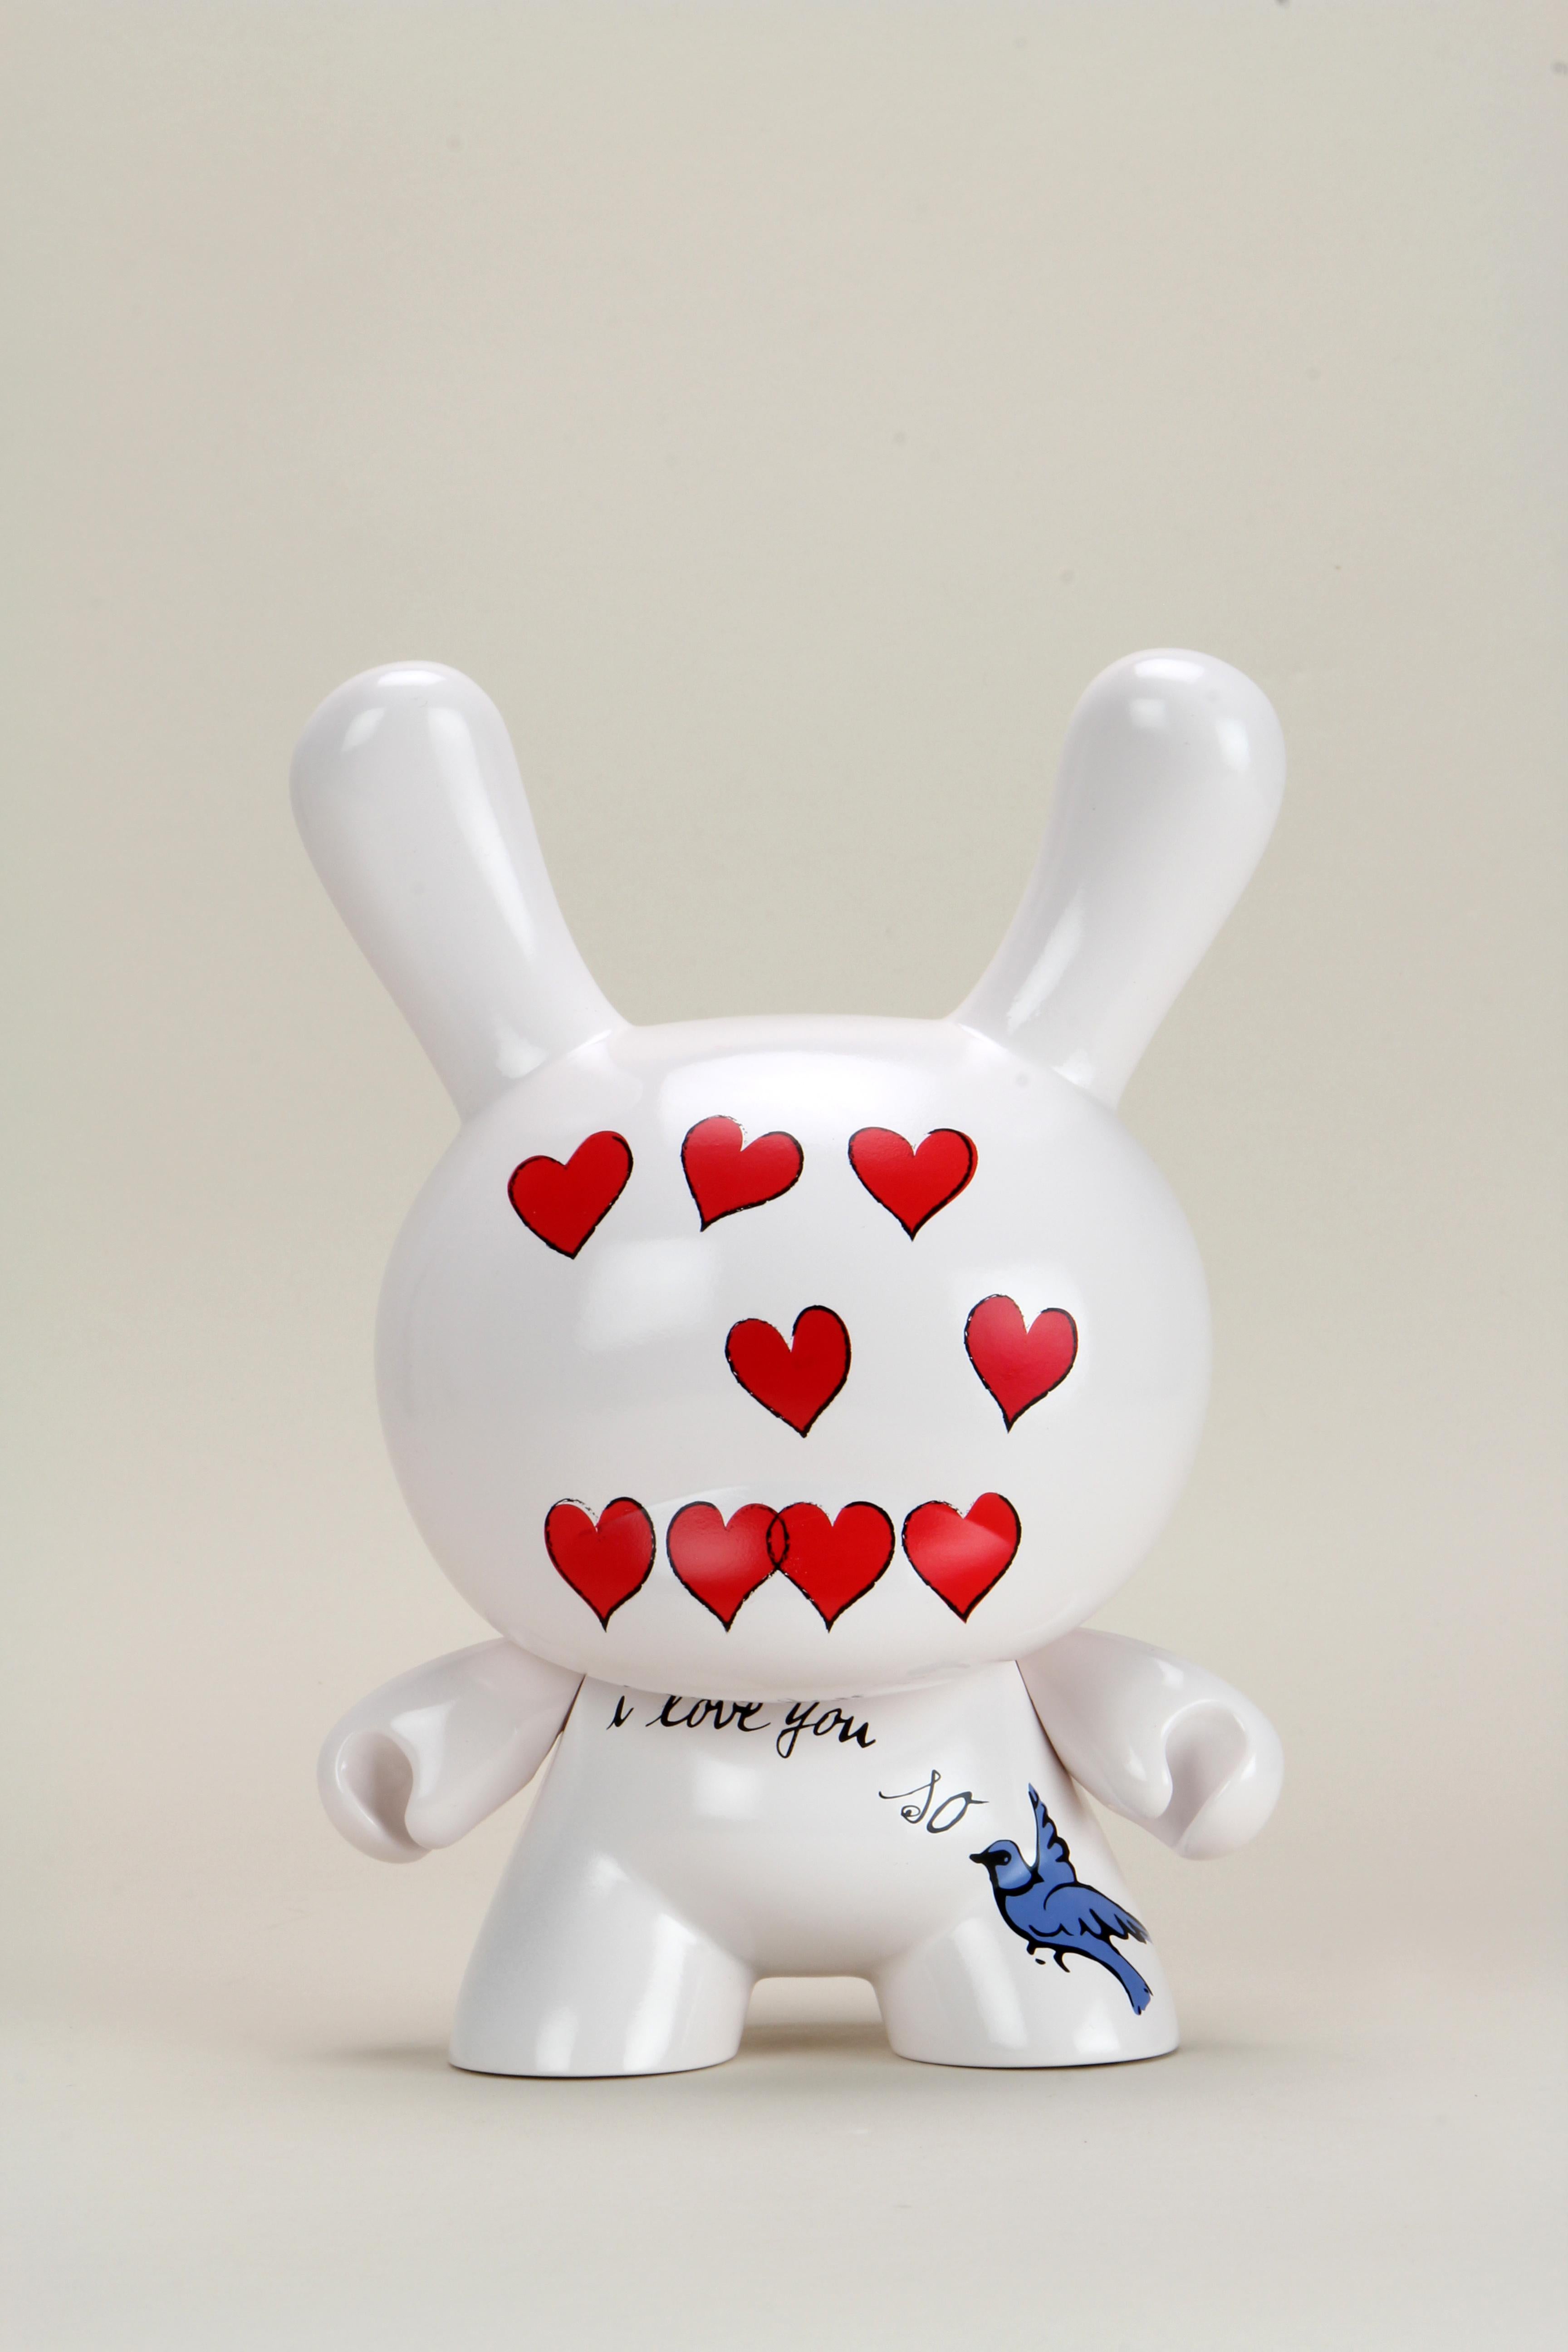 (after) Andy Warhol Figurative Sculpture - Andy Warhol Foundations Kid Robot  "I Love You So" Dunny 